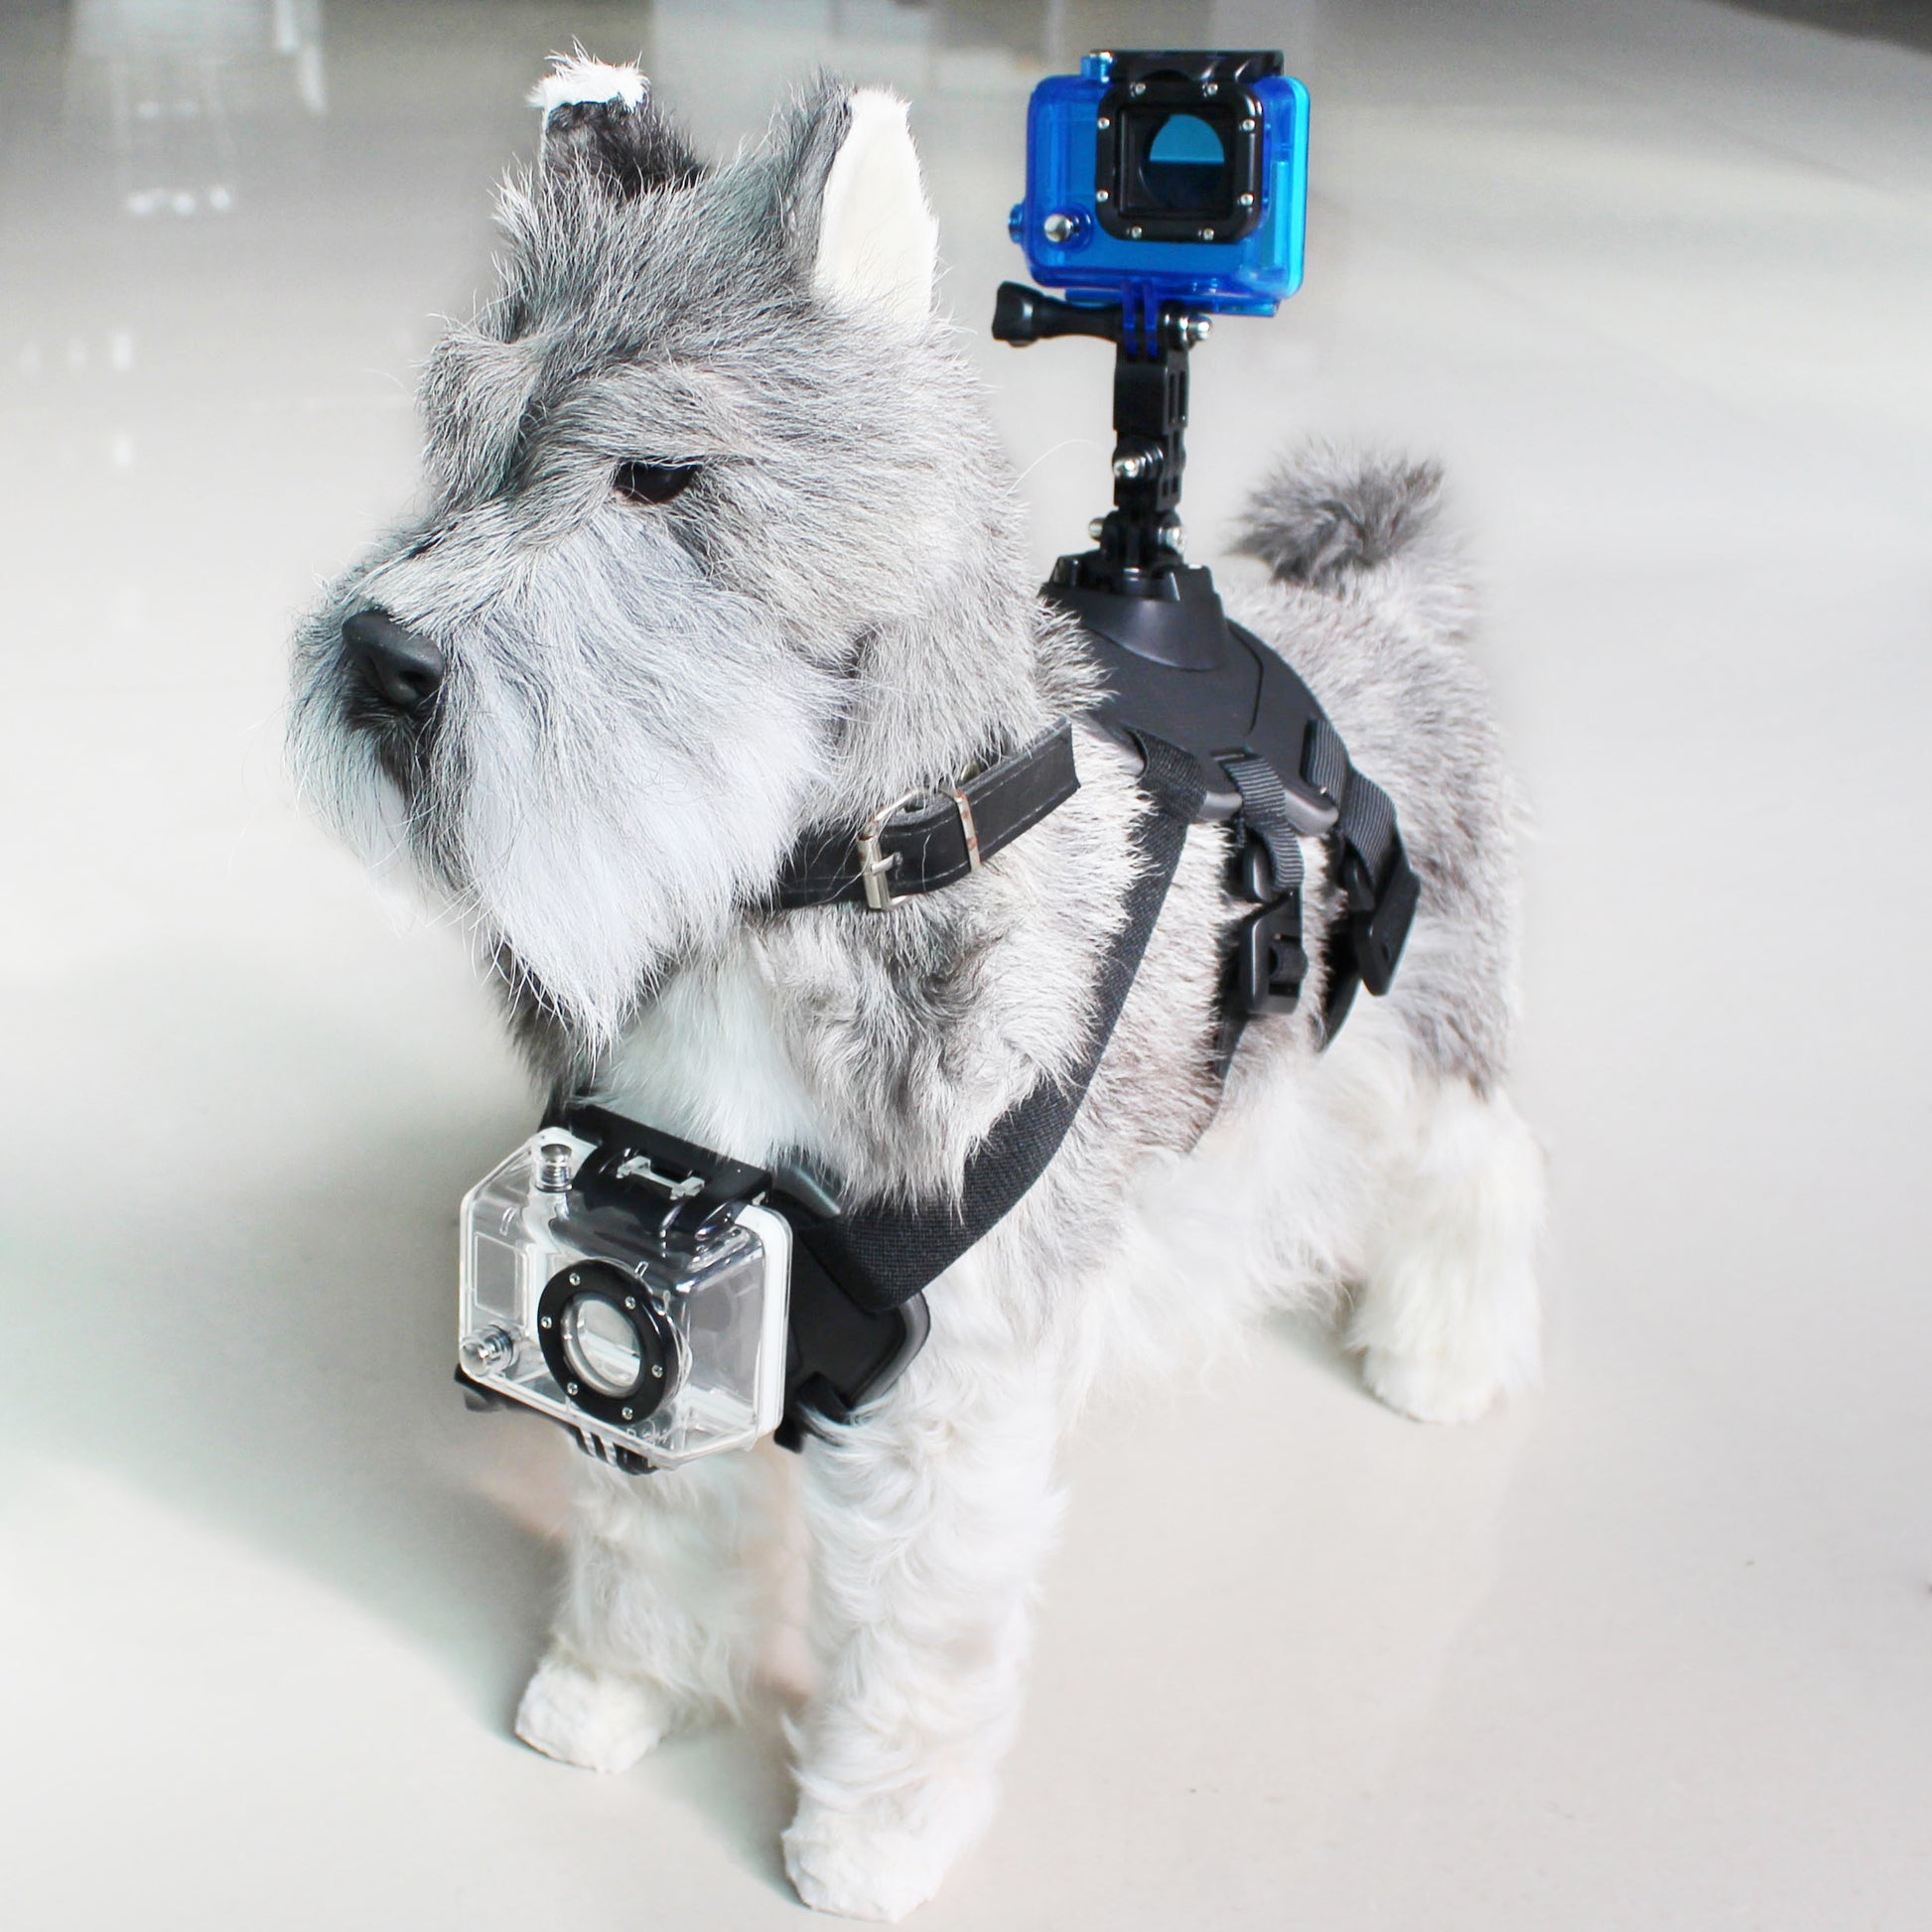 Pet Harness with Support for Sports Camera KSIX Black, KSIX, Electronics, Photography and video cameras, pet-harness-with-support-for-sports-camera-ksix-black, Brand_KSIX, category-reference-2609, category-reference-2662, category-reference-2666, category-reference-2932, category-reference-2936, category-reference-t-19653, category-reference-t-8122, category-reference-t-8337, category-reference-t-8338, Condition_NEW, deportista / en forma, fotografía, gimnasio, Price_20 - 50, running, travel, RiotNook